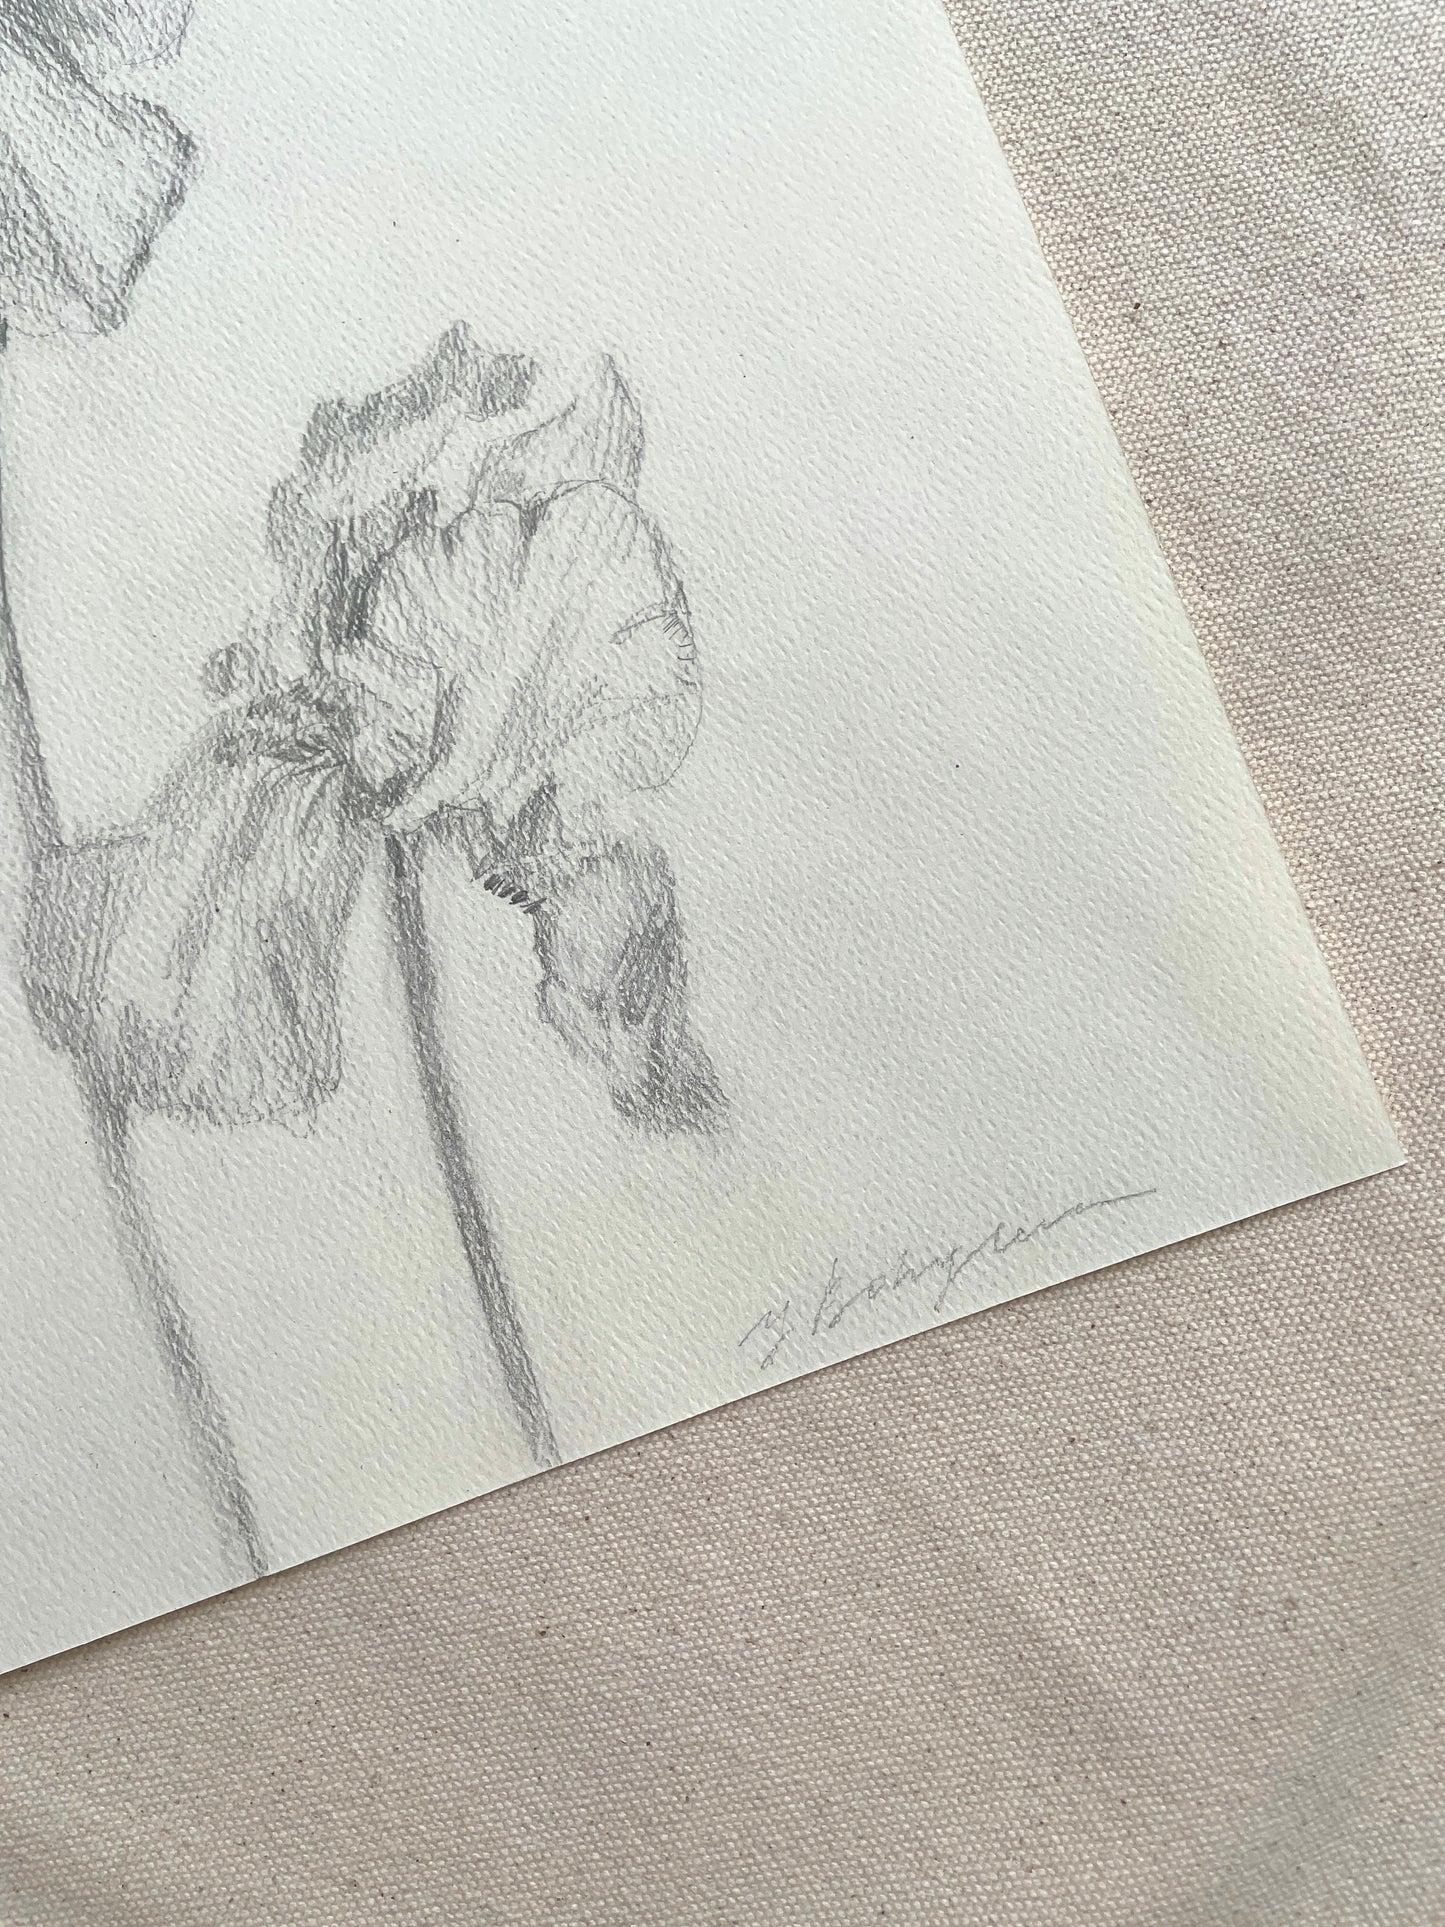 Unframed pencil drawing of iris flowers perfect for interior design.